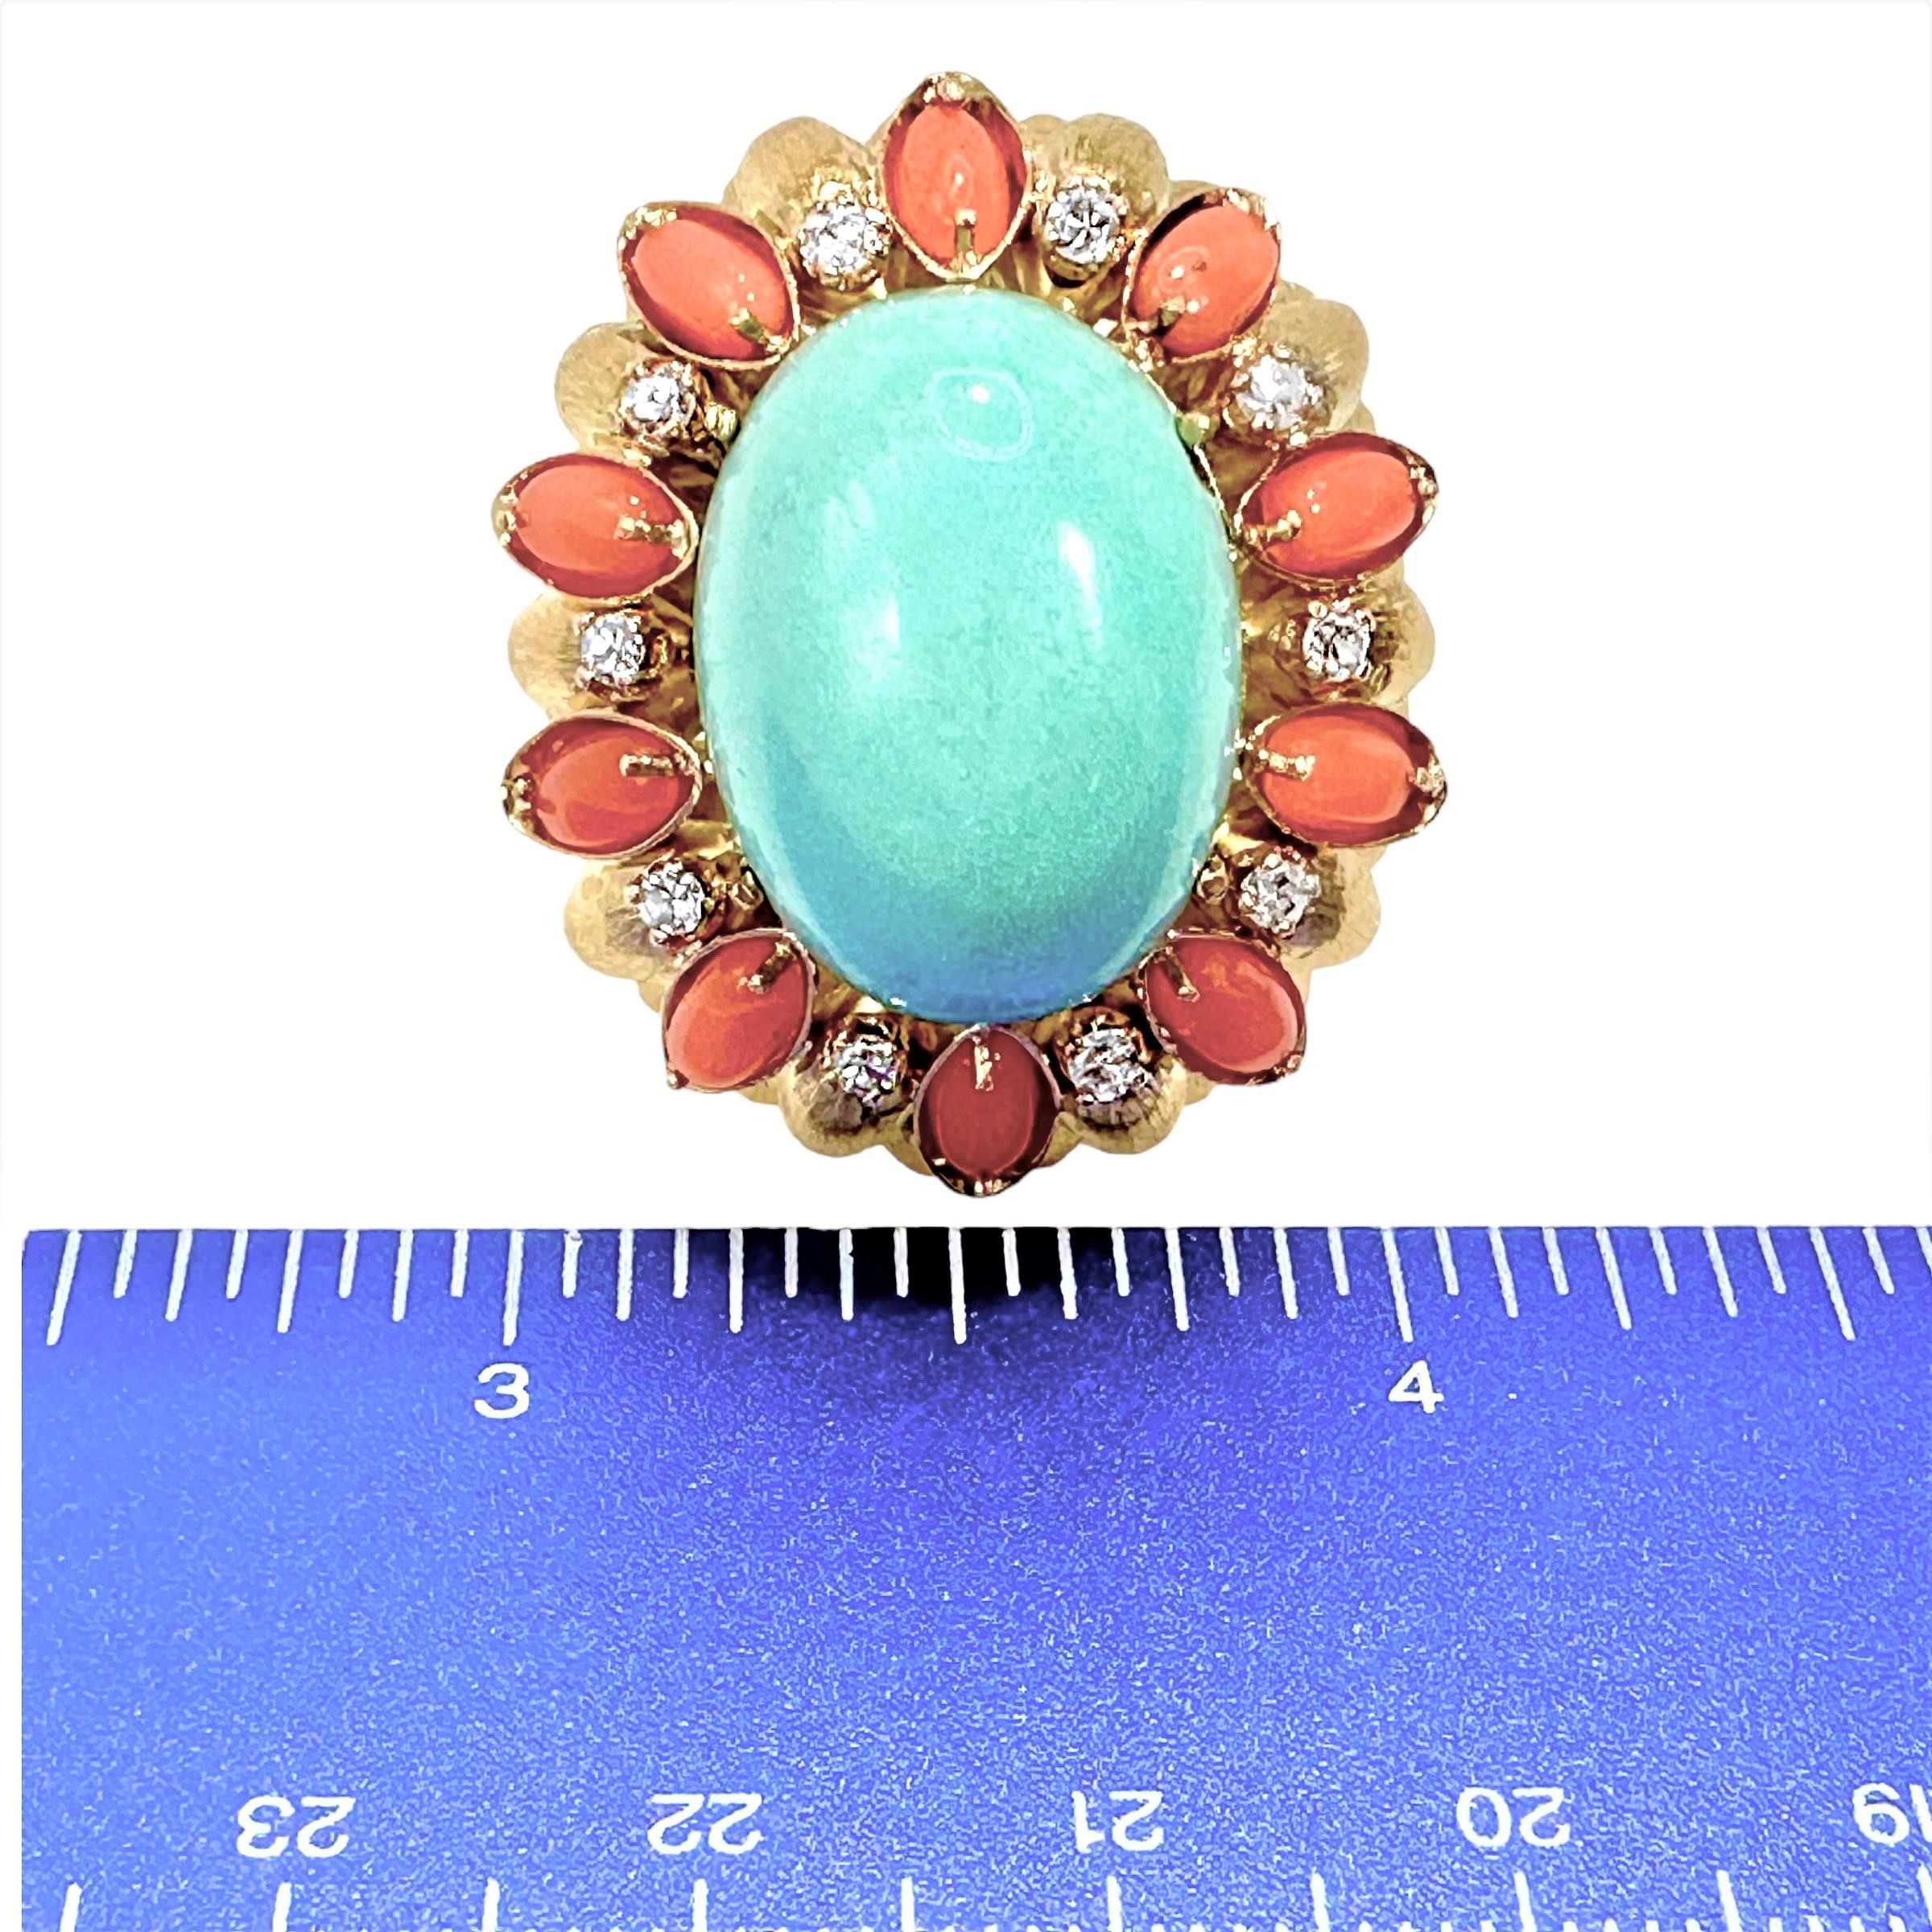 Large Scale Mid-20th Century 18K Yellow Gold, Coral, Turquoise and Diamond Ring For Sale 1